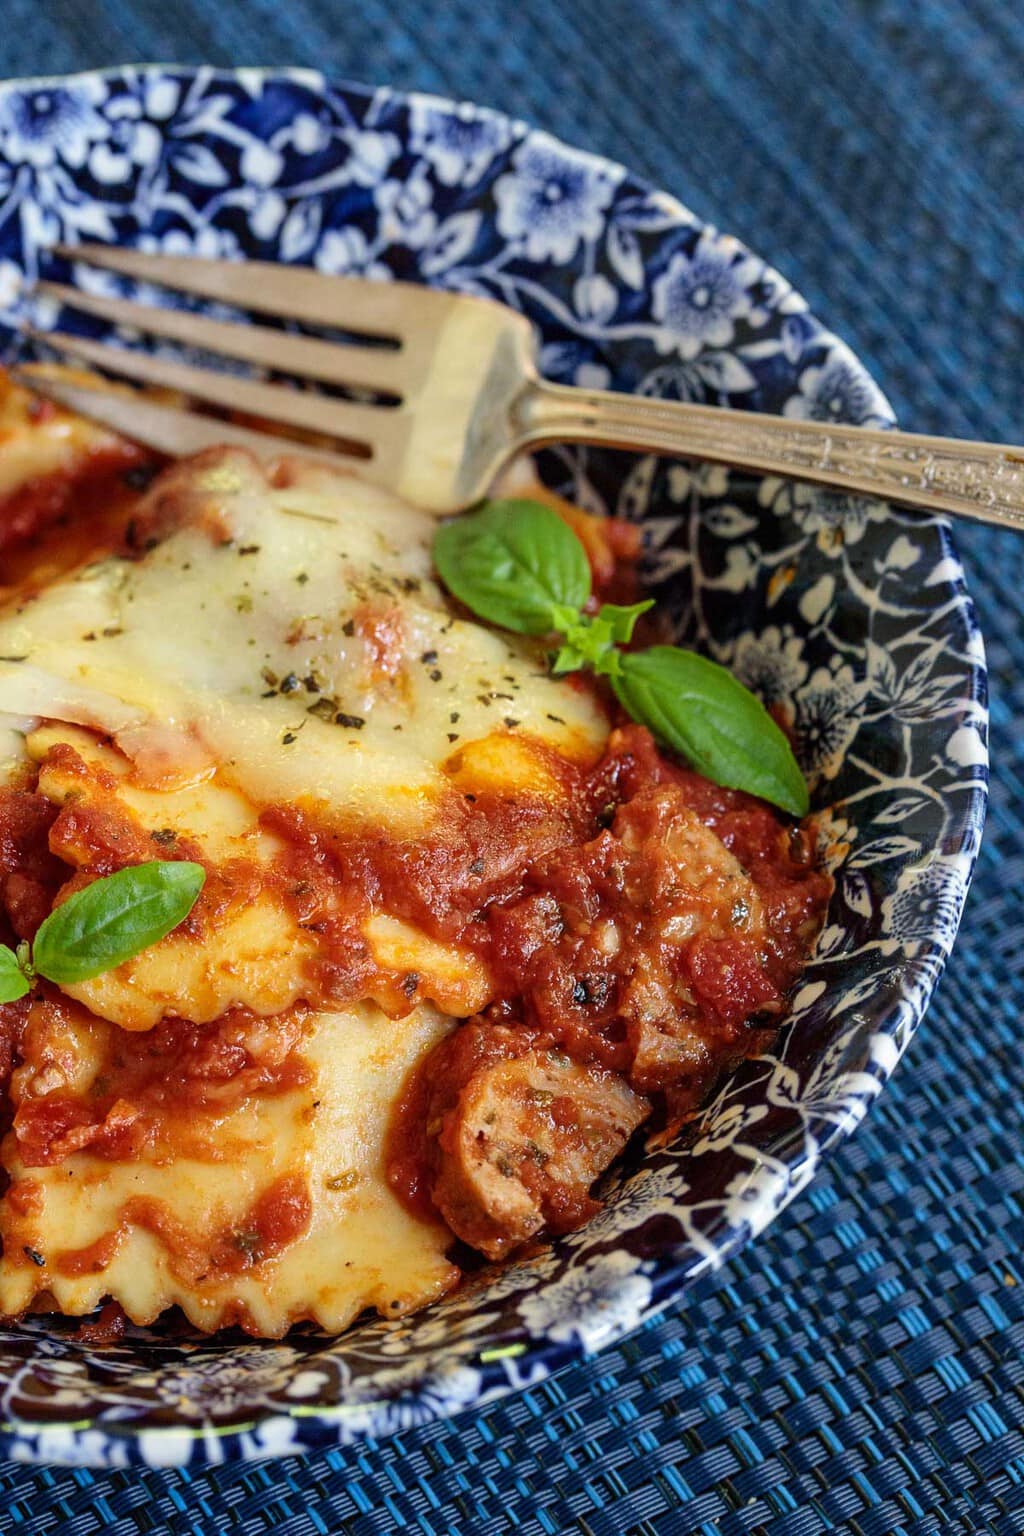 Photo of a serving of Italian Chicken Sausage Ravioli Lasagna in a blue and white patterned bowl garnished with basil leaves.